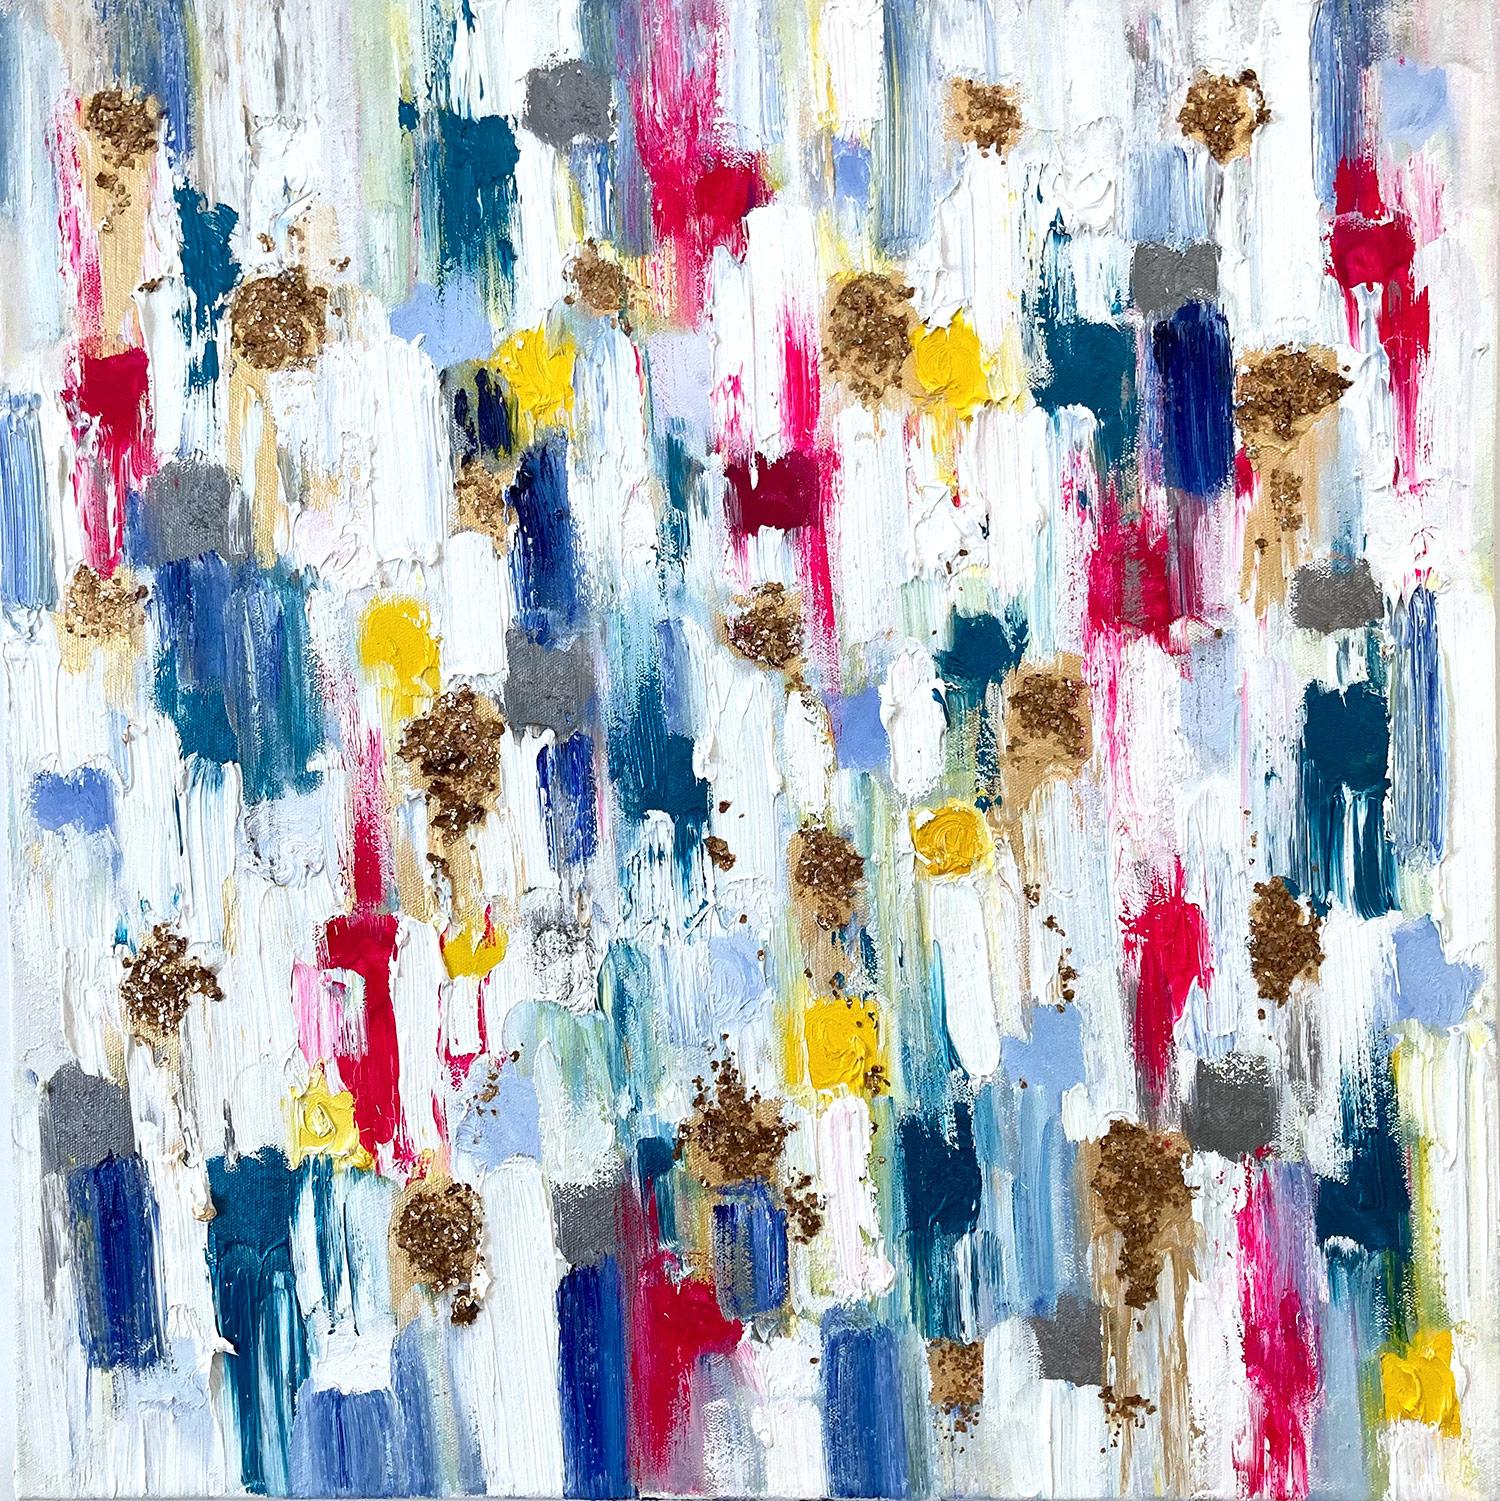 Cindy Shaoul Abstract Painting - "Dripping Dots - Hollywood Boulevard" Colorful Abstract Oil Painting on Canvas